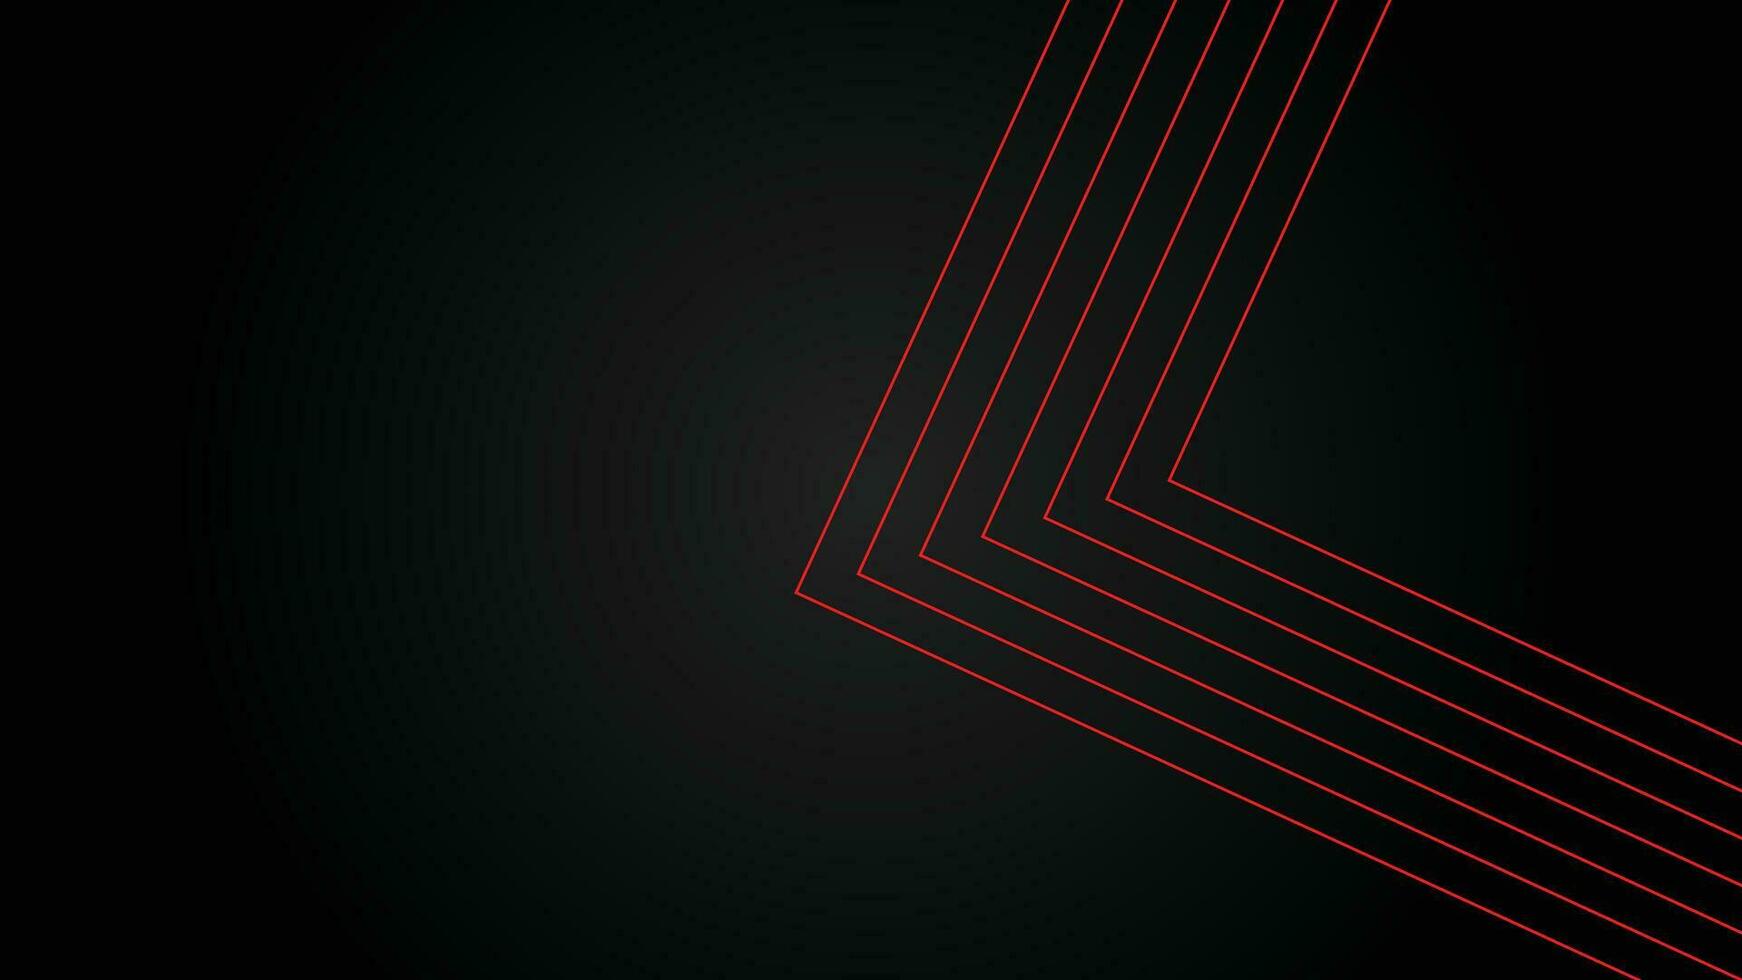 Dark futuristic wide abstract banner background with red lines pattern vector illustration